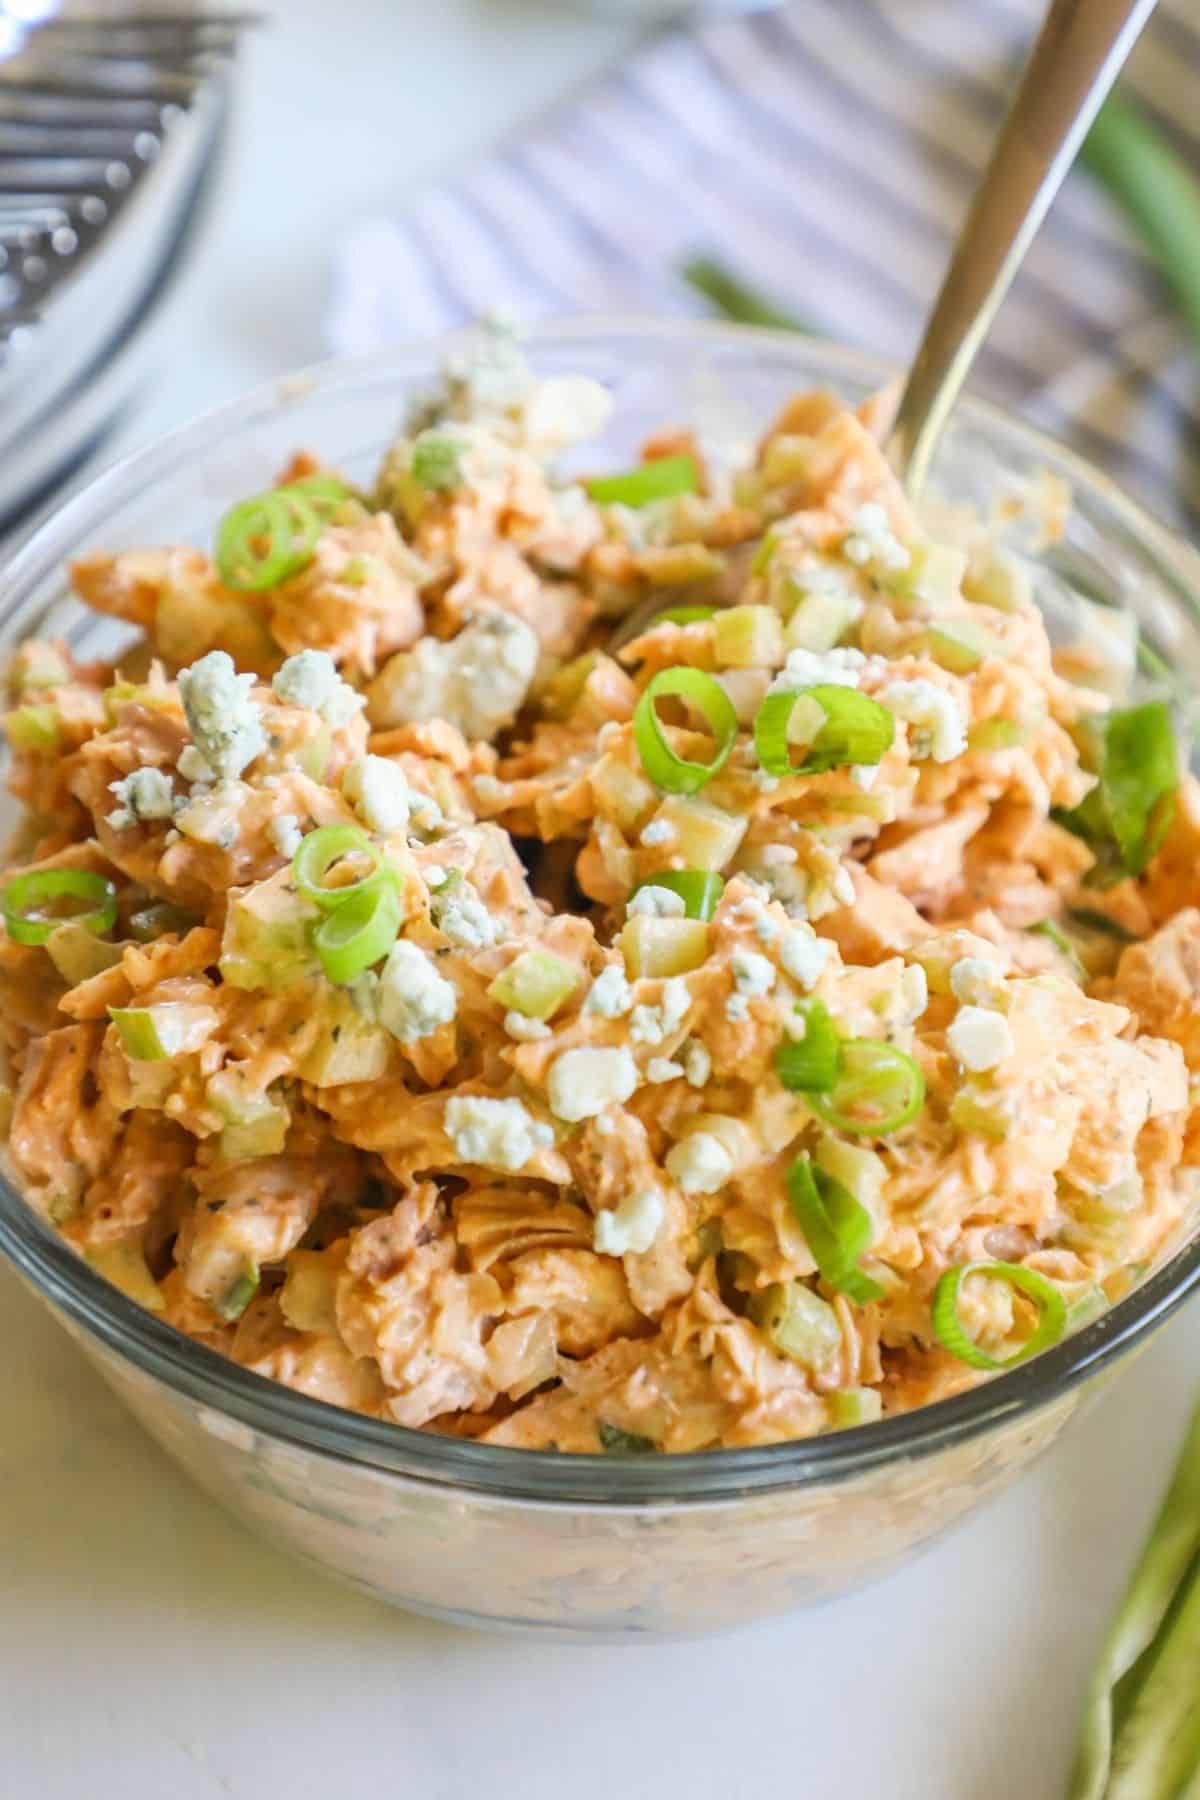 buffalo ranch chicken salad in a clear bowl